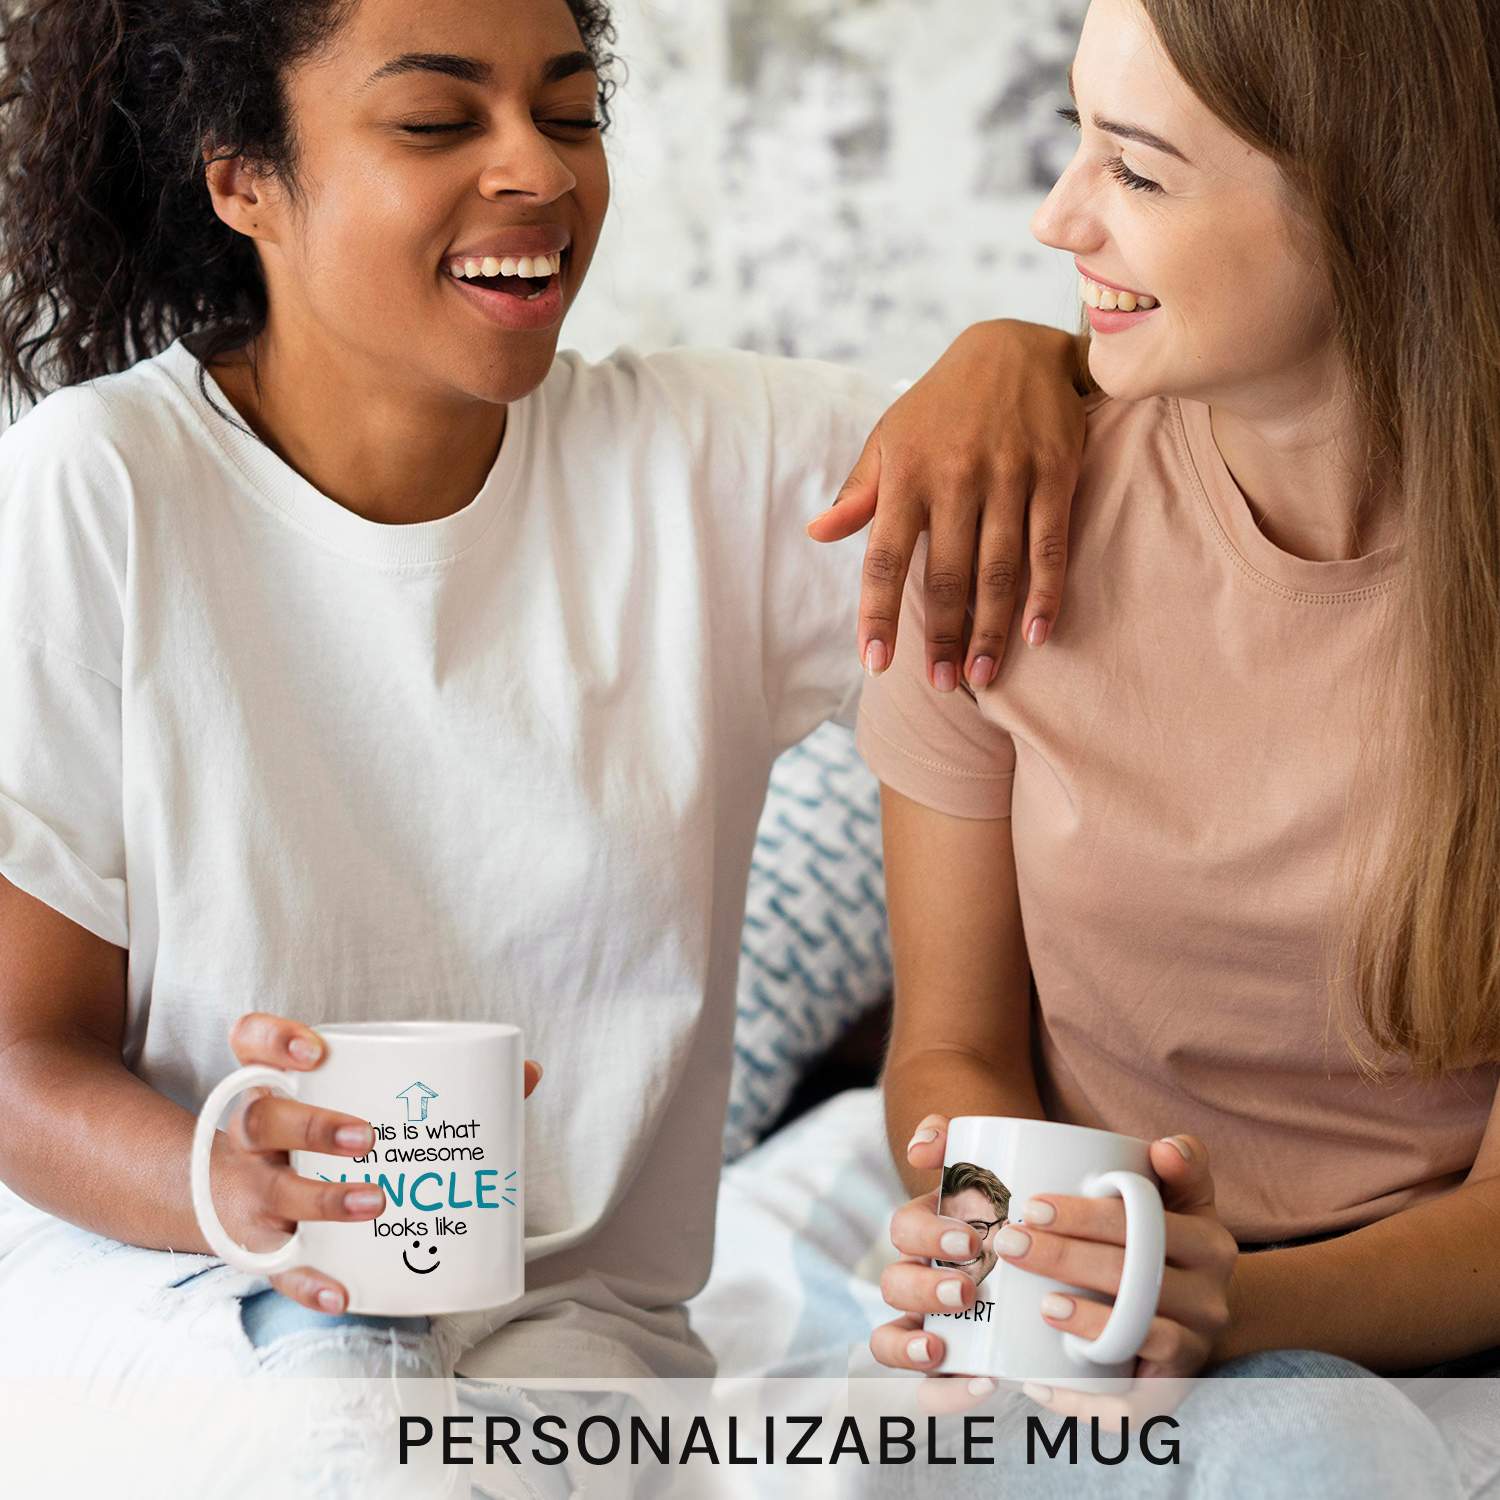 What An Awesome Uncle Looks Like - Personalized Birthday or Christmas gift for Uncle - Custom Mug - MyMindfulGifts